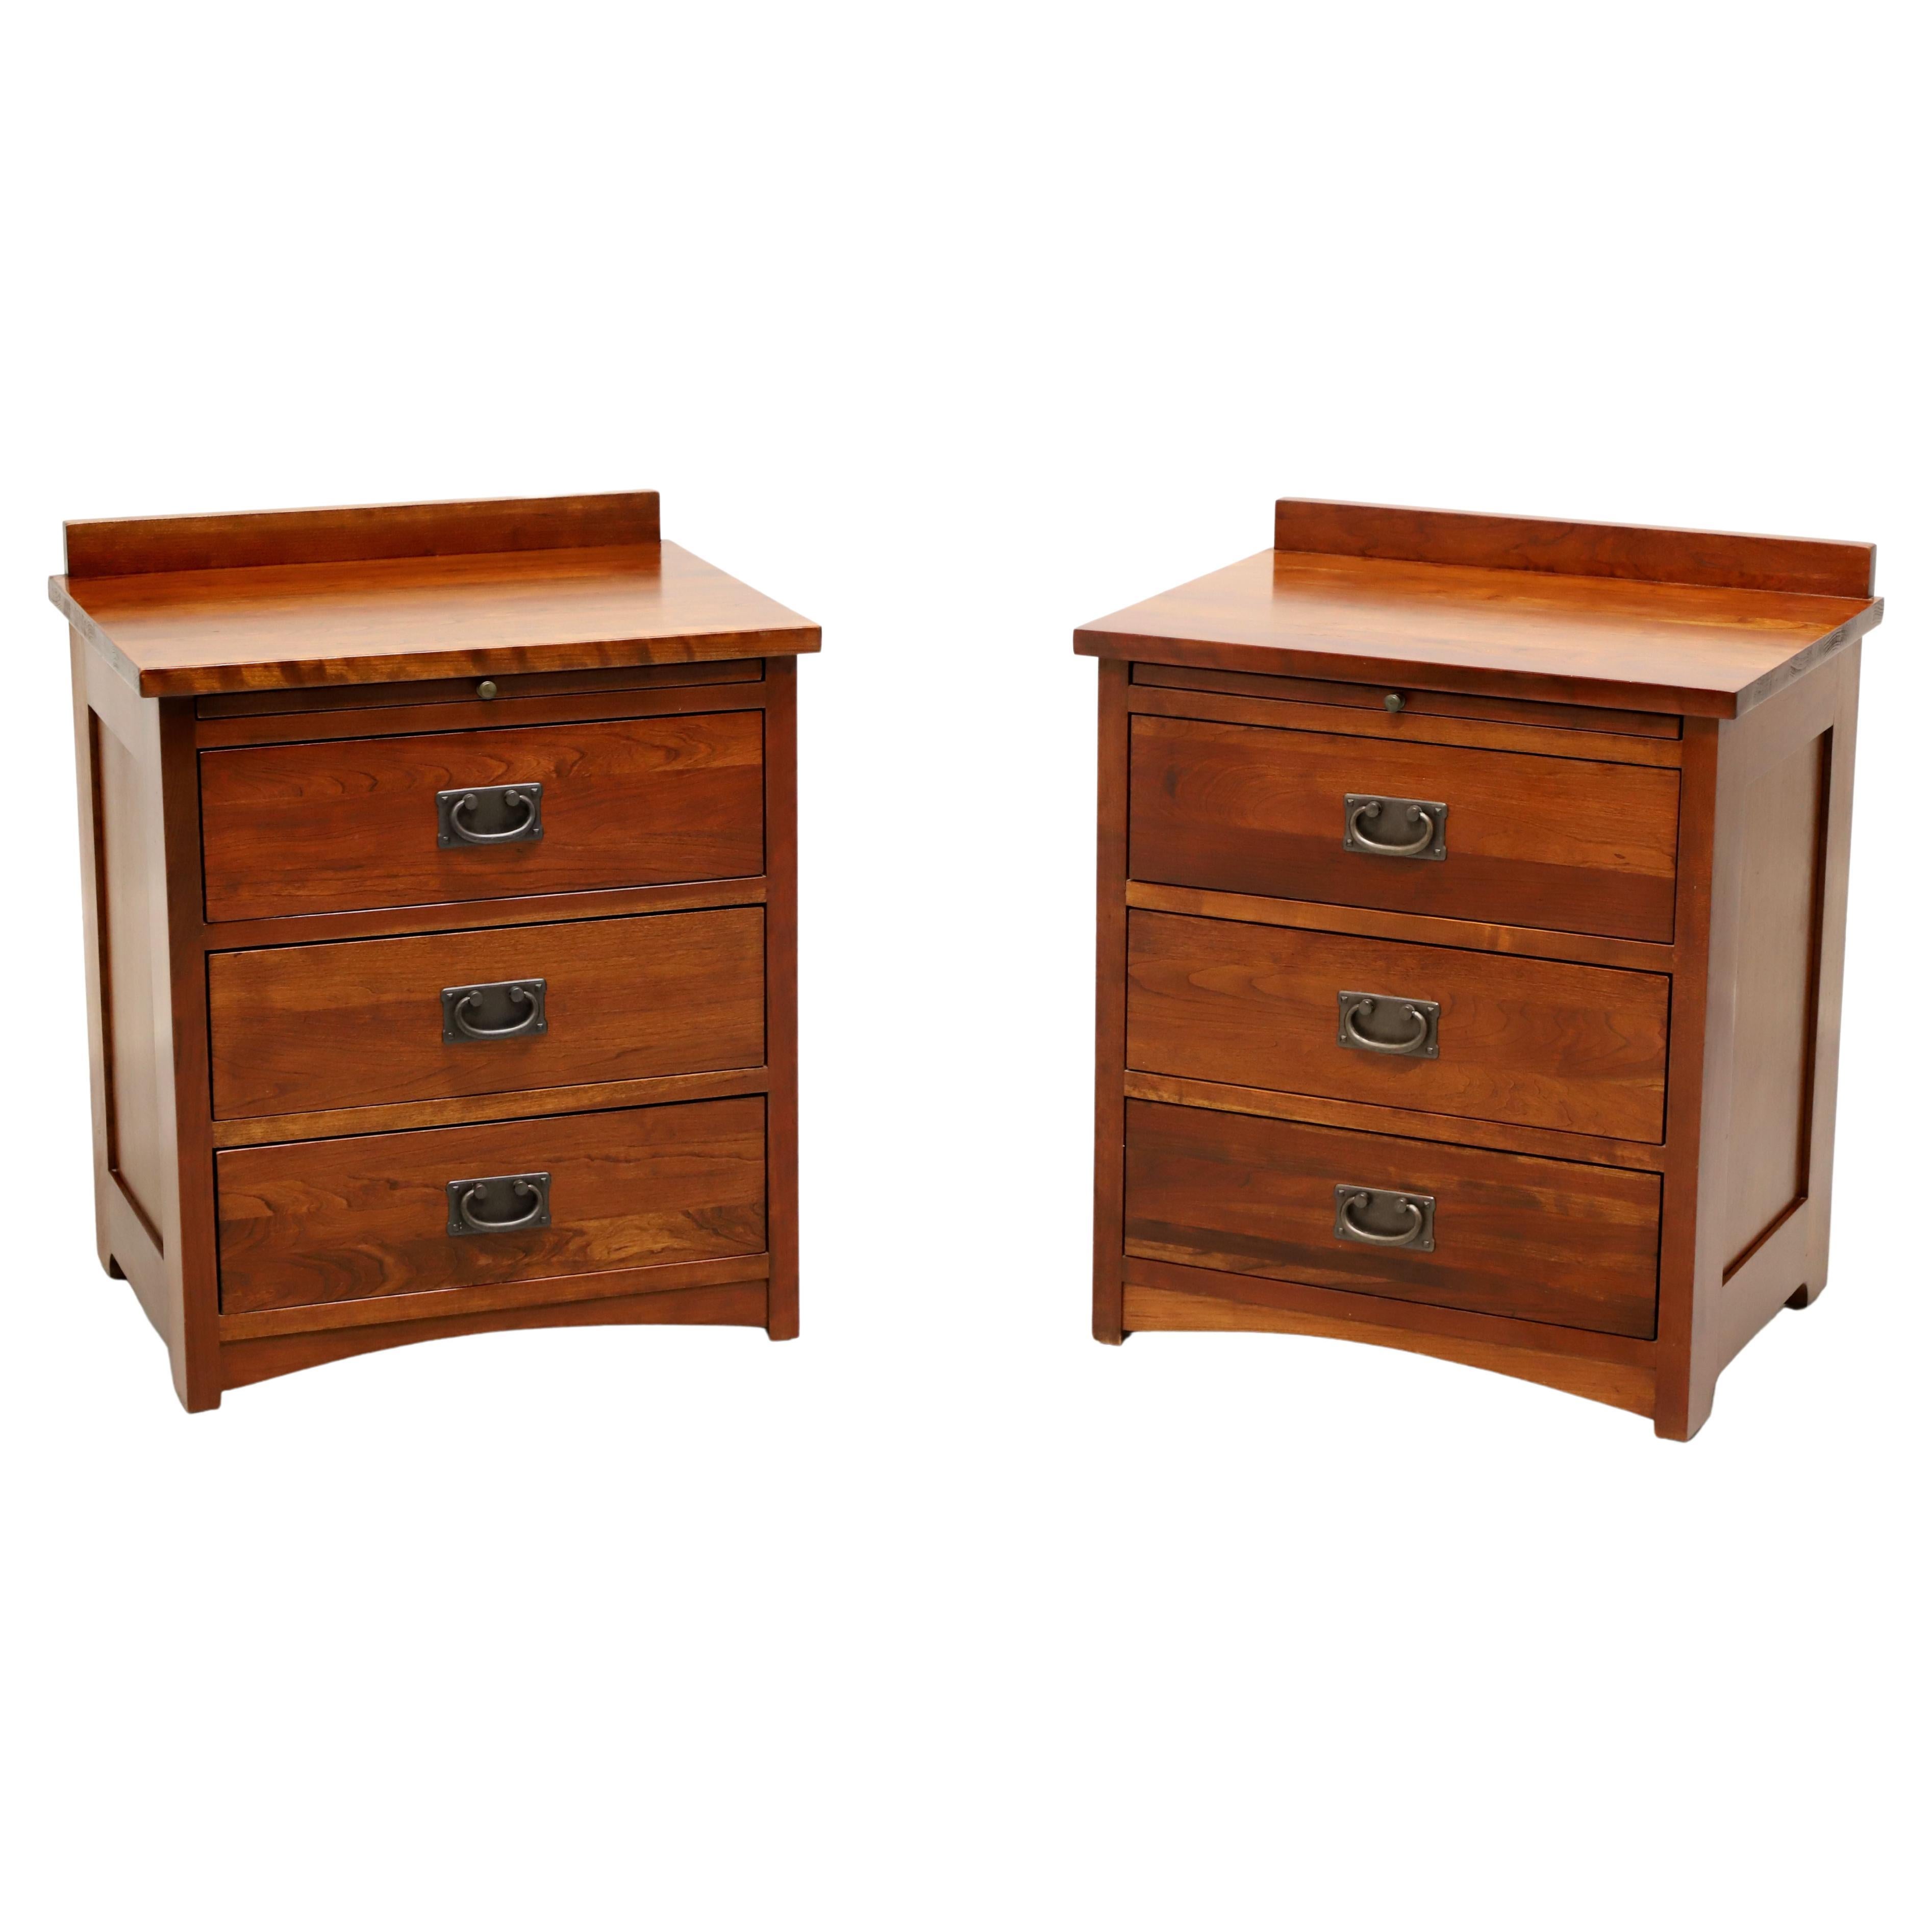 MICHEAL'S MISSION by MILLER Cherry Arts & Crafts Nightstands - Pair